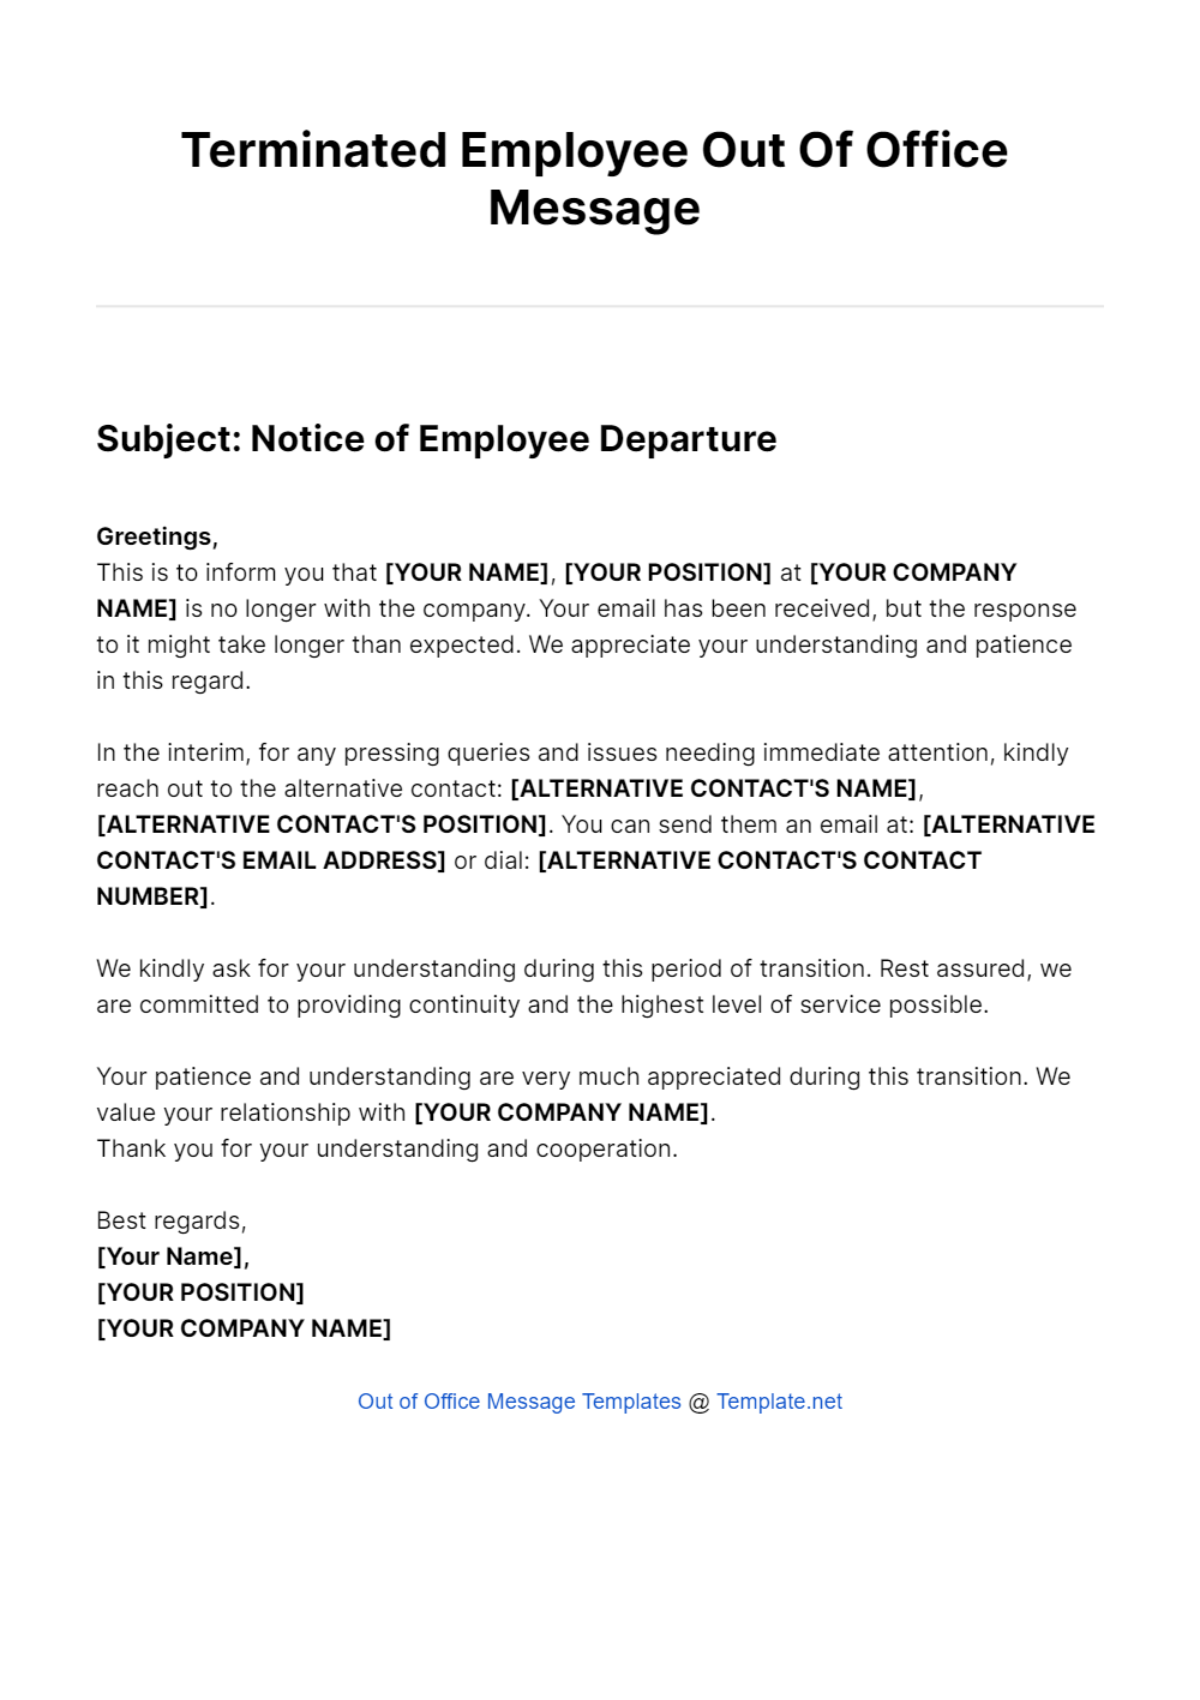 Terminated Employee Out Of Office Message Template